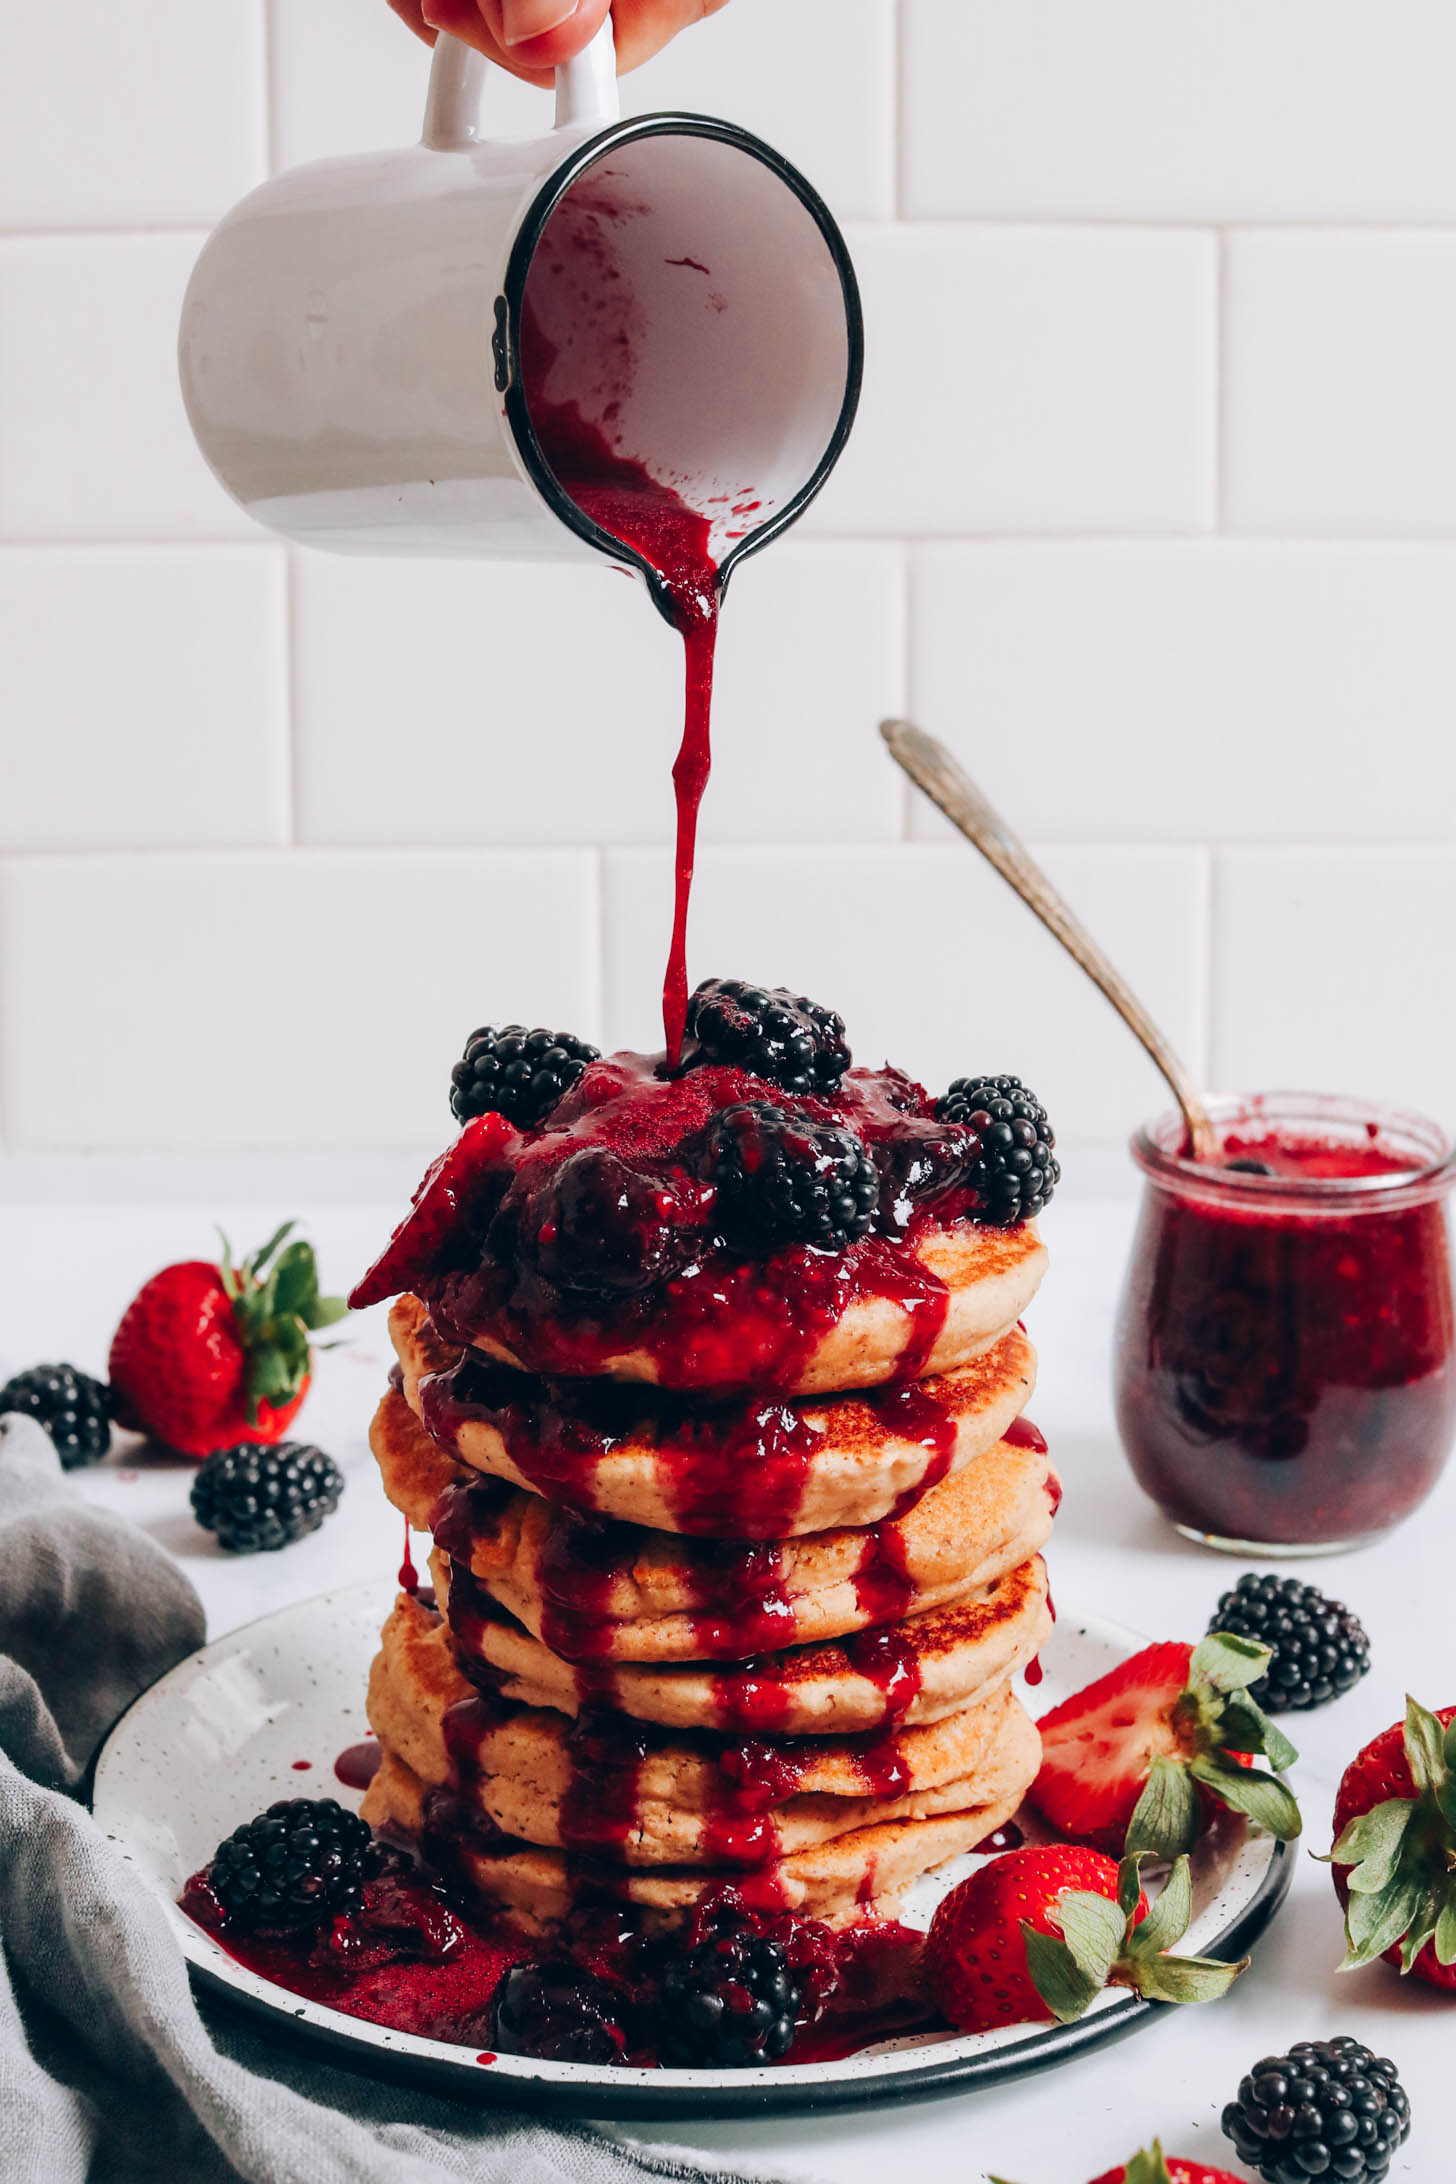 Pouring mixed berry compote onto a stack of gluten-free pancakes